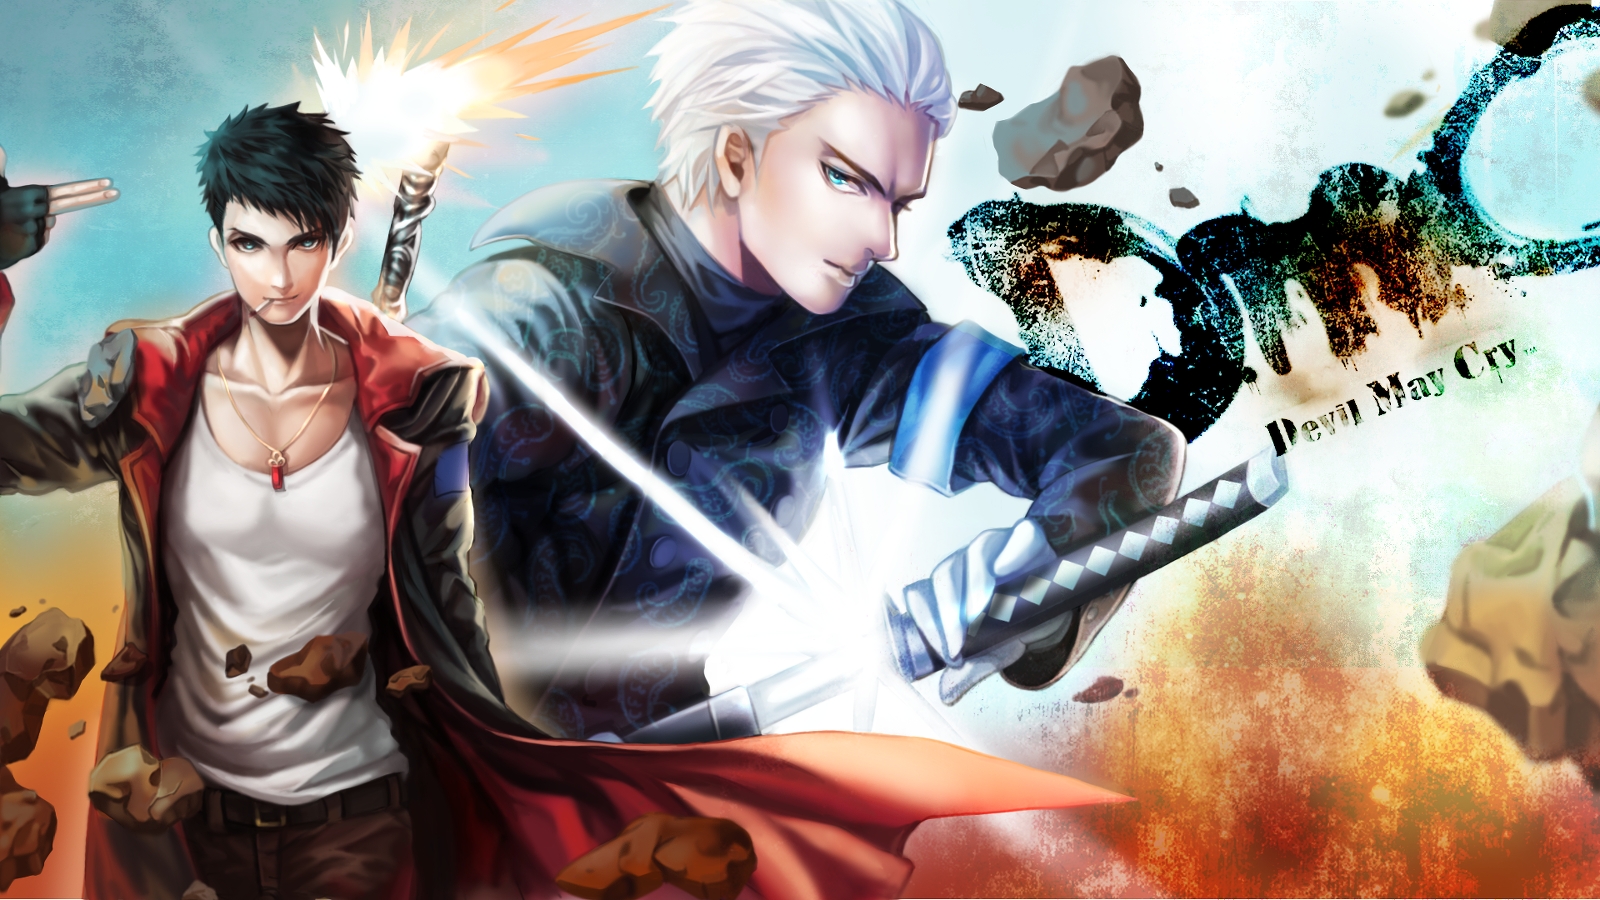 the devil may cry download free